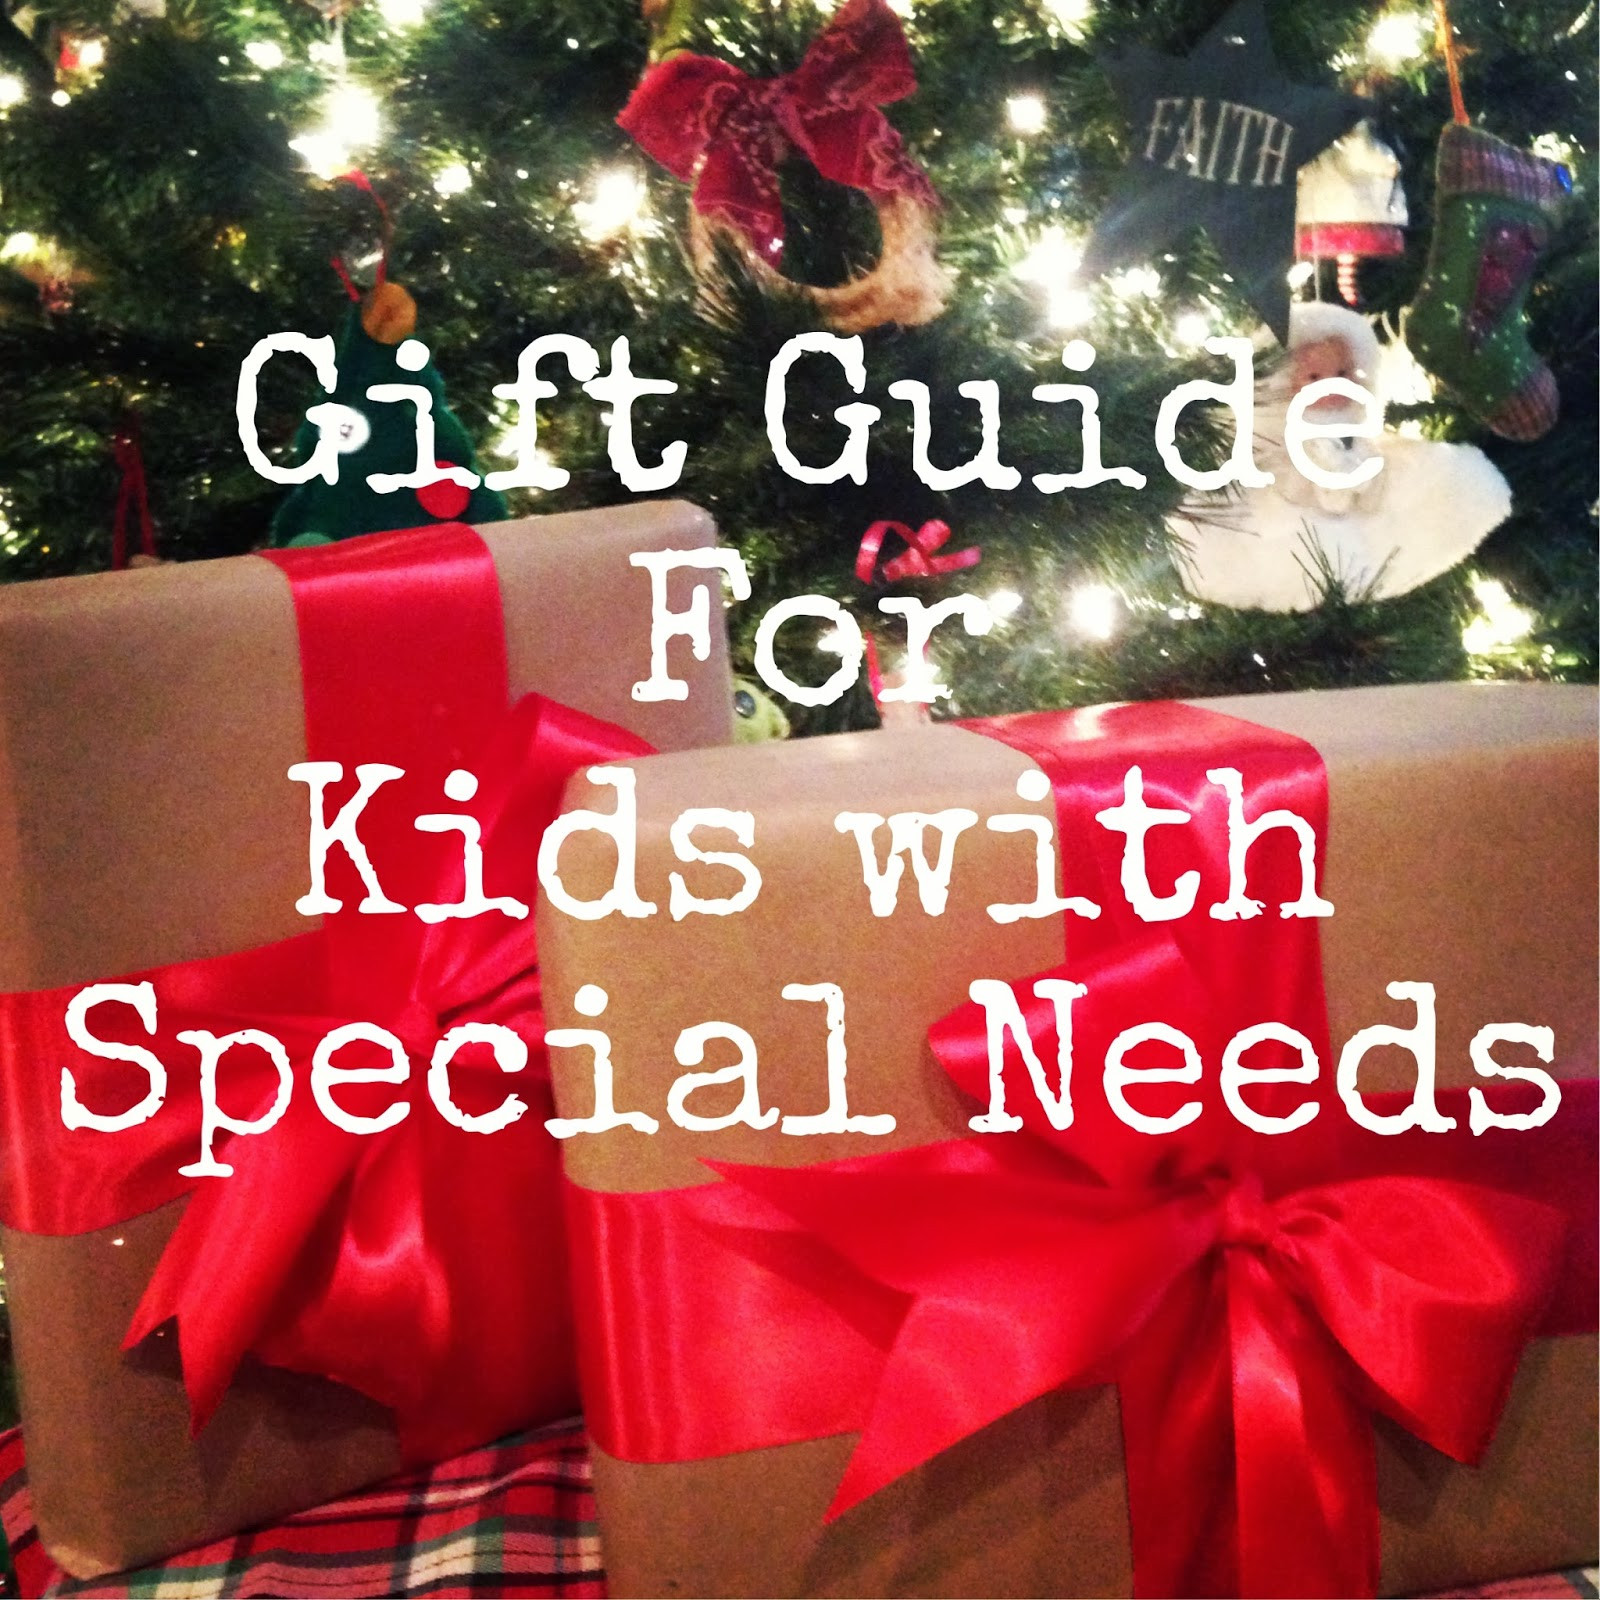 Gifts For Handicapped Child
 Along Came the Bird Gift Guide for Special Needs Kids